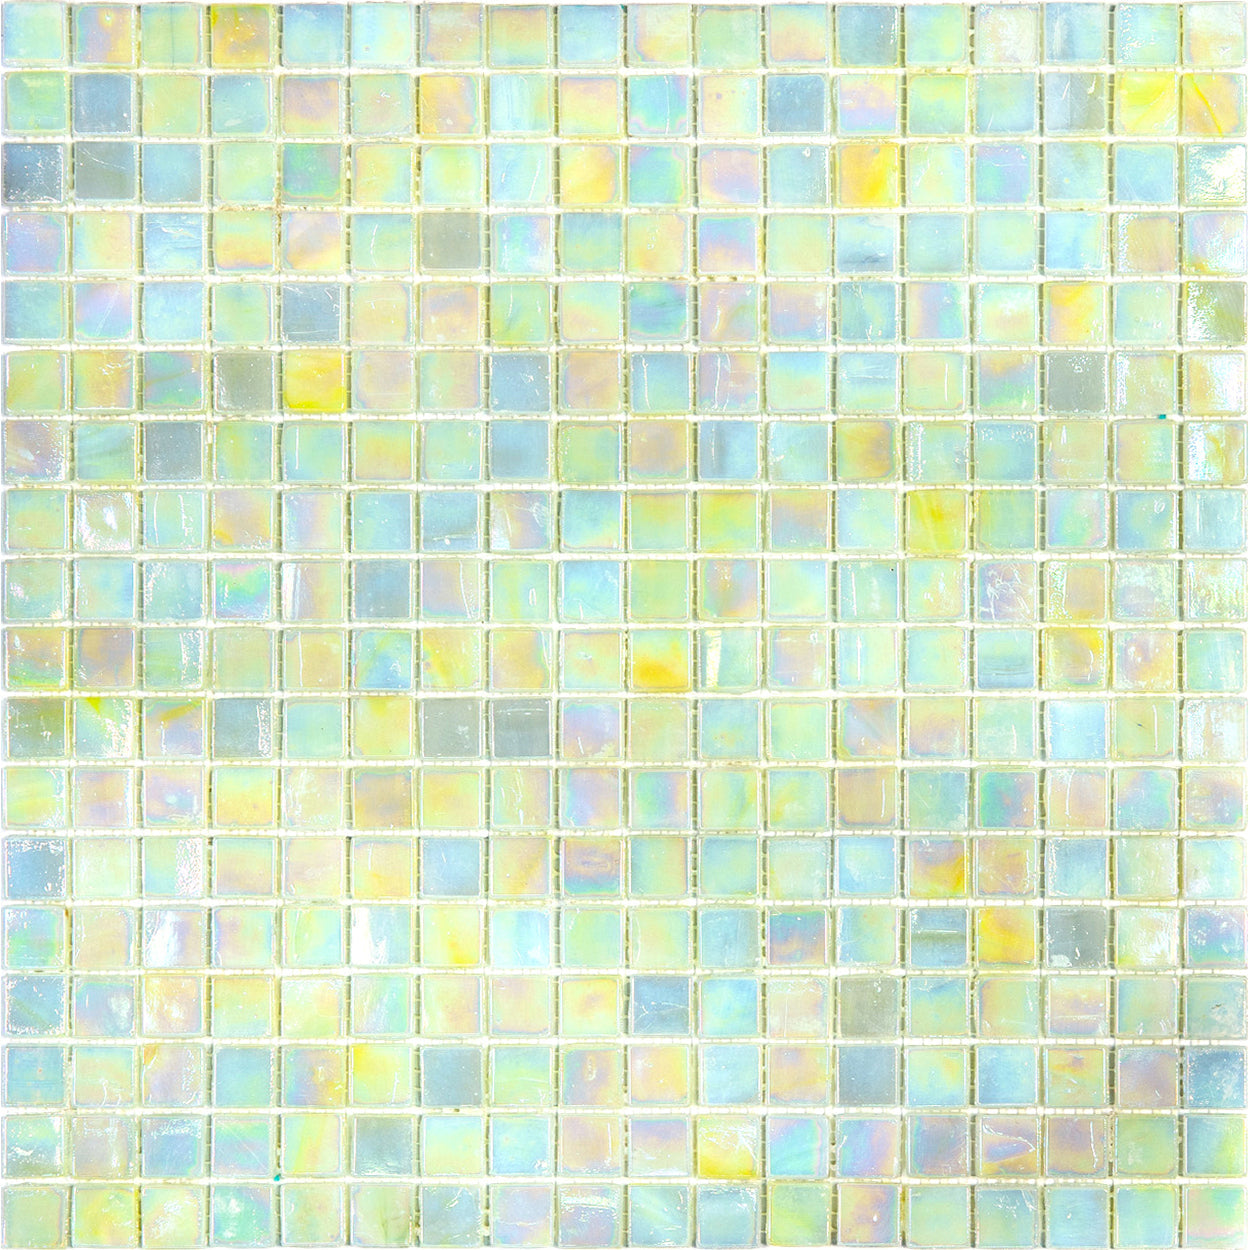 mir alma solid colors 0_6 inch nibble nd38 wall and floor mosaic distributed by surface group natural materials